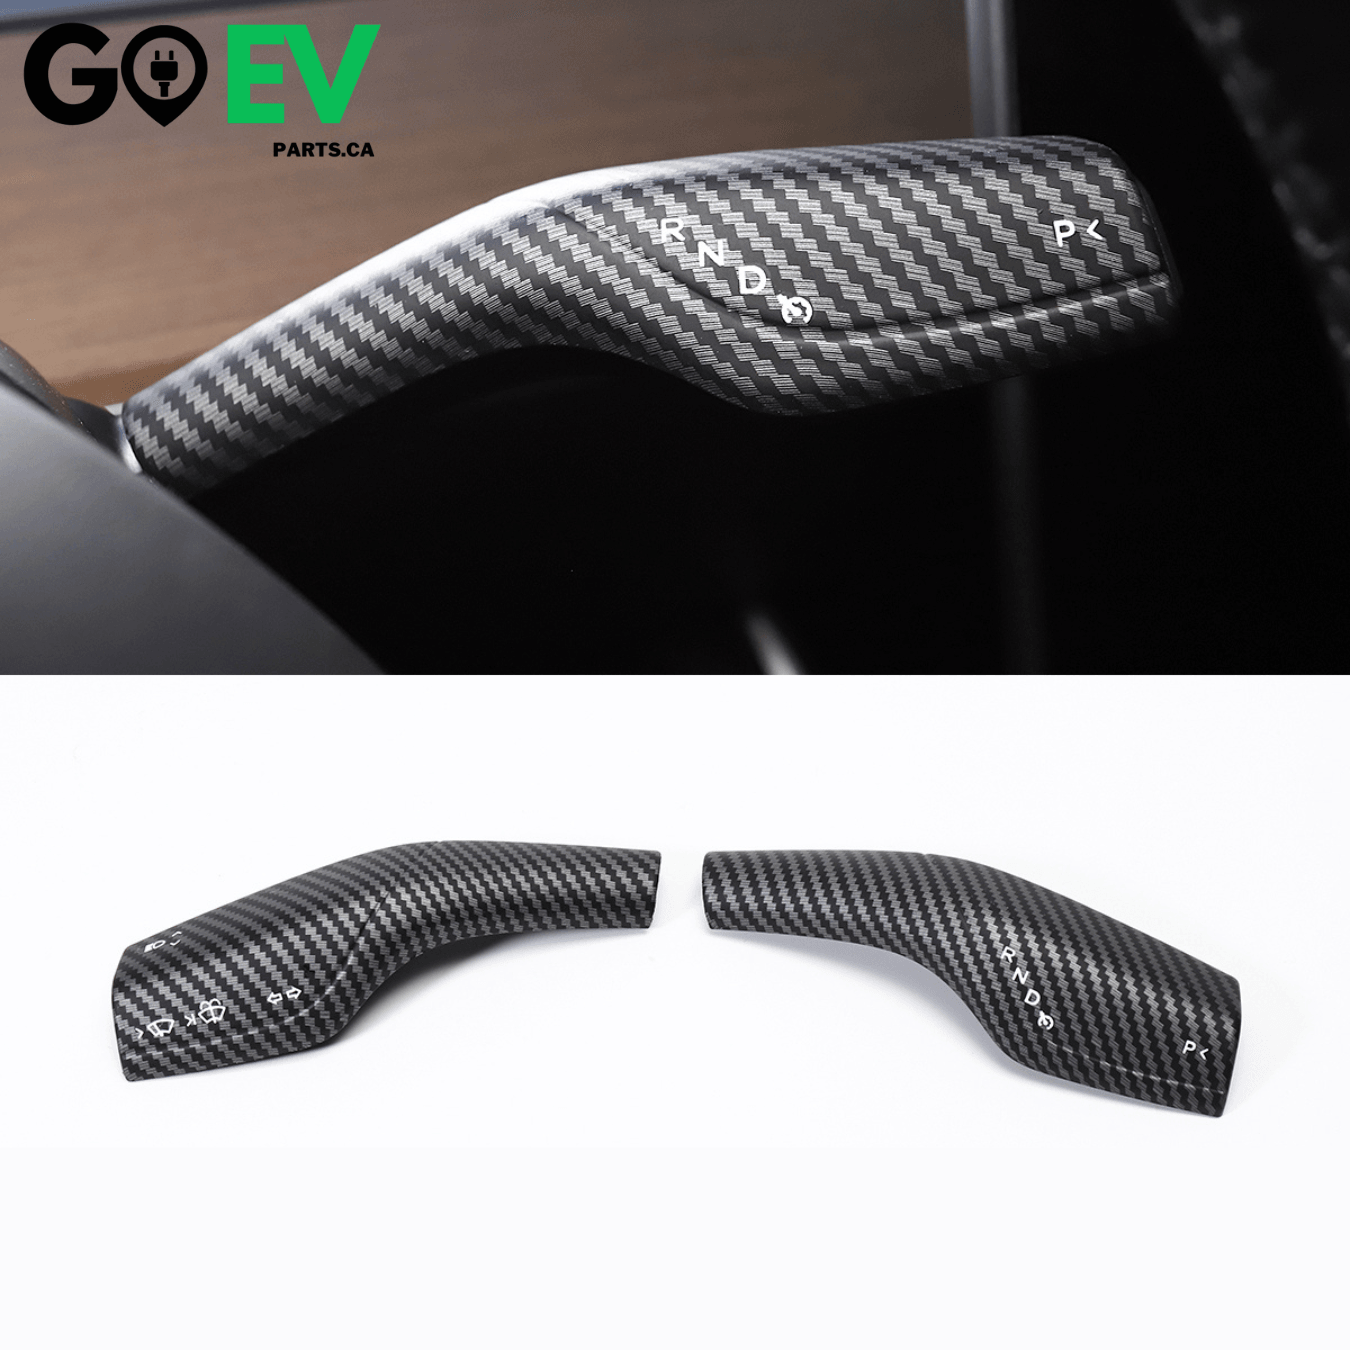 Model 3/Y: Lever Covers (2 PCs) Gear Shift and Wiper Control - GOEVPARTS